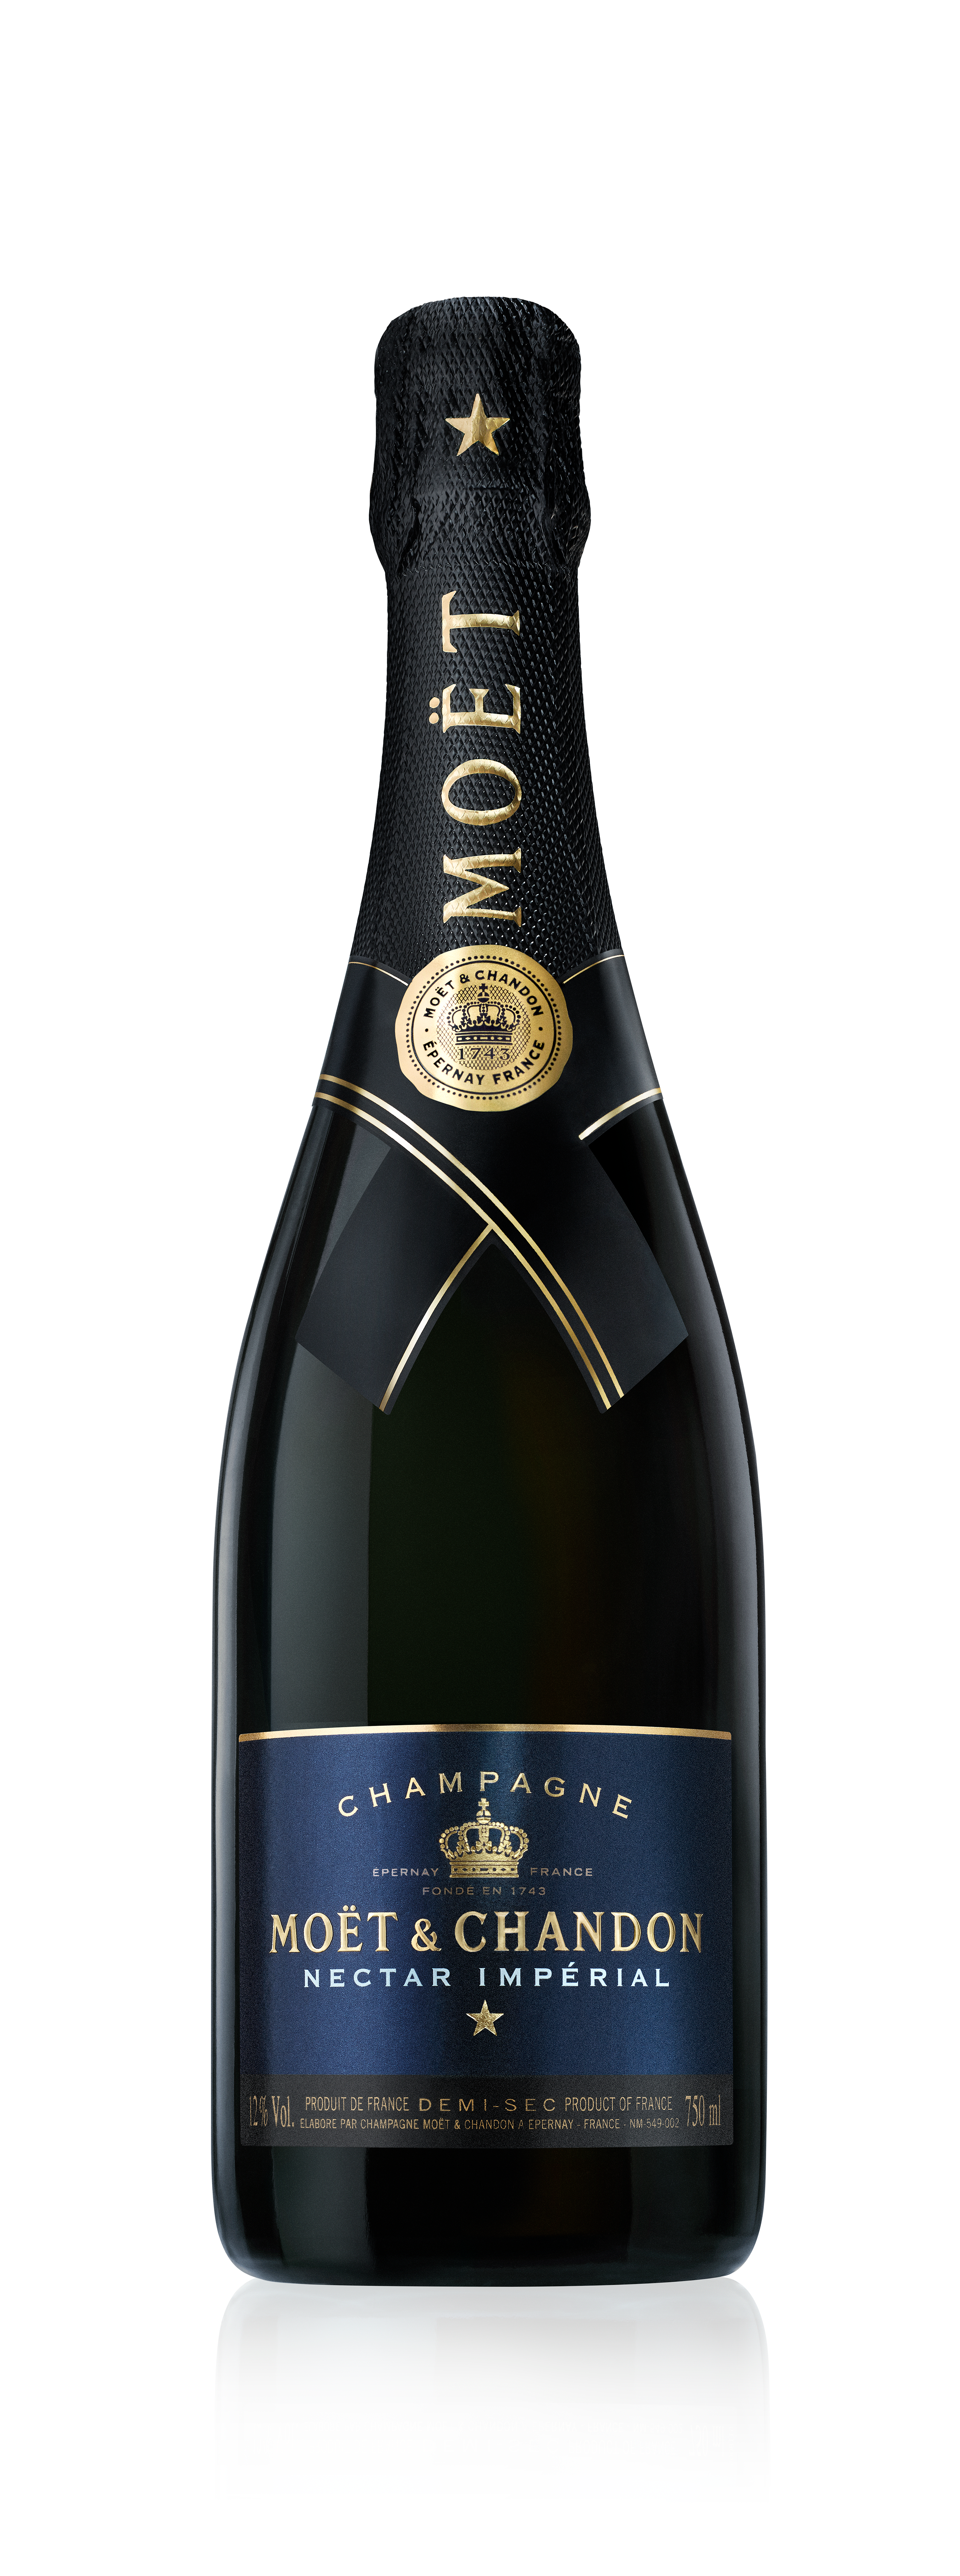 Moet & Chandon Nectar Imperial Champagner